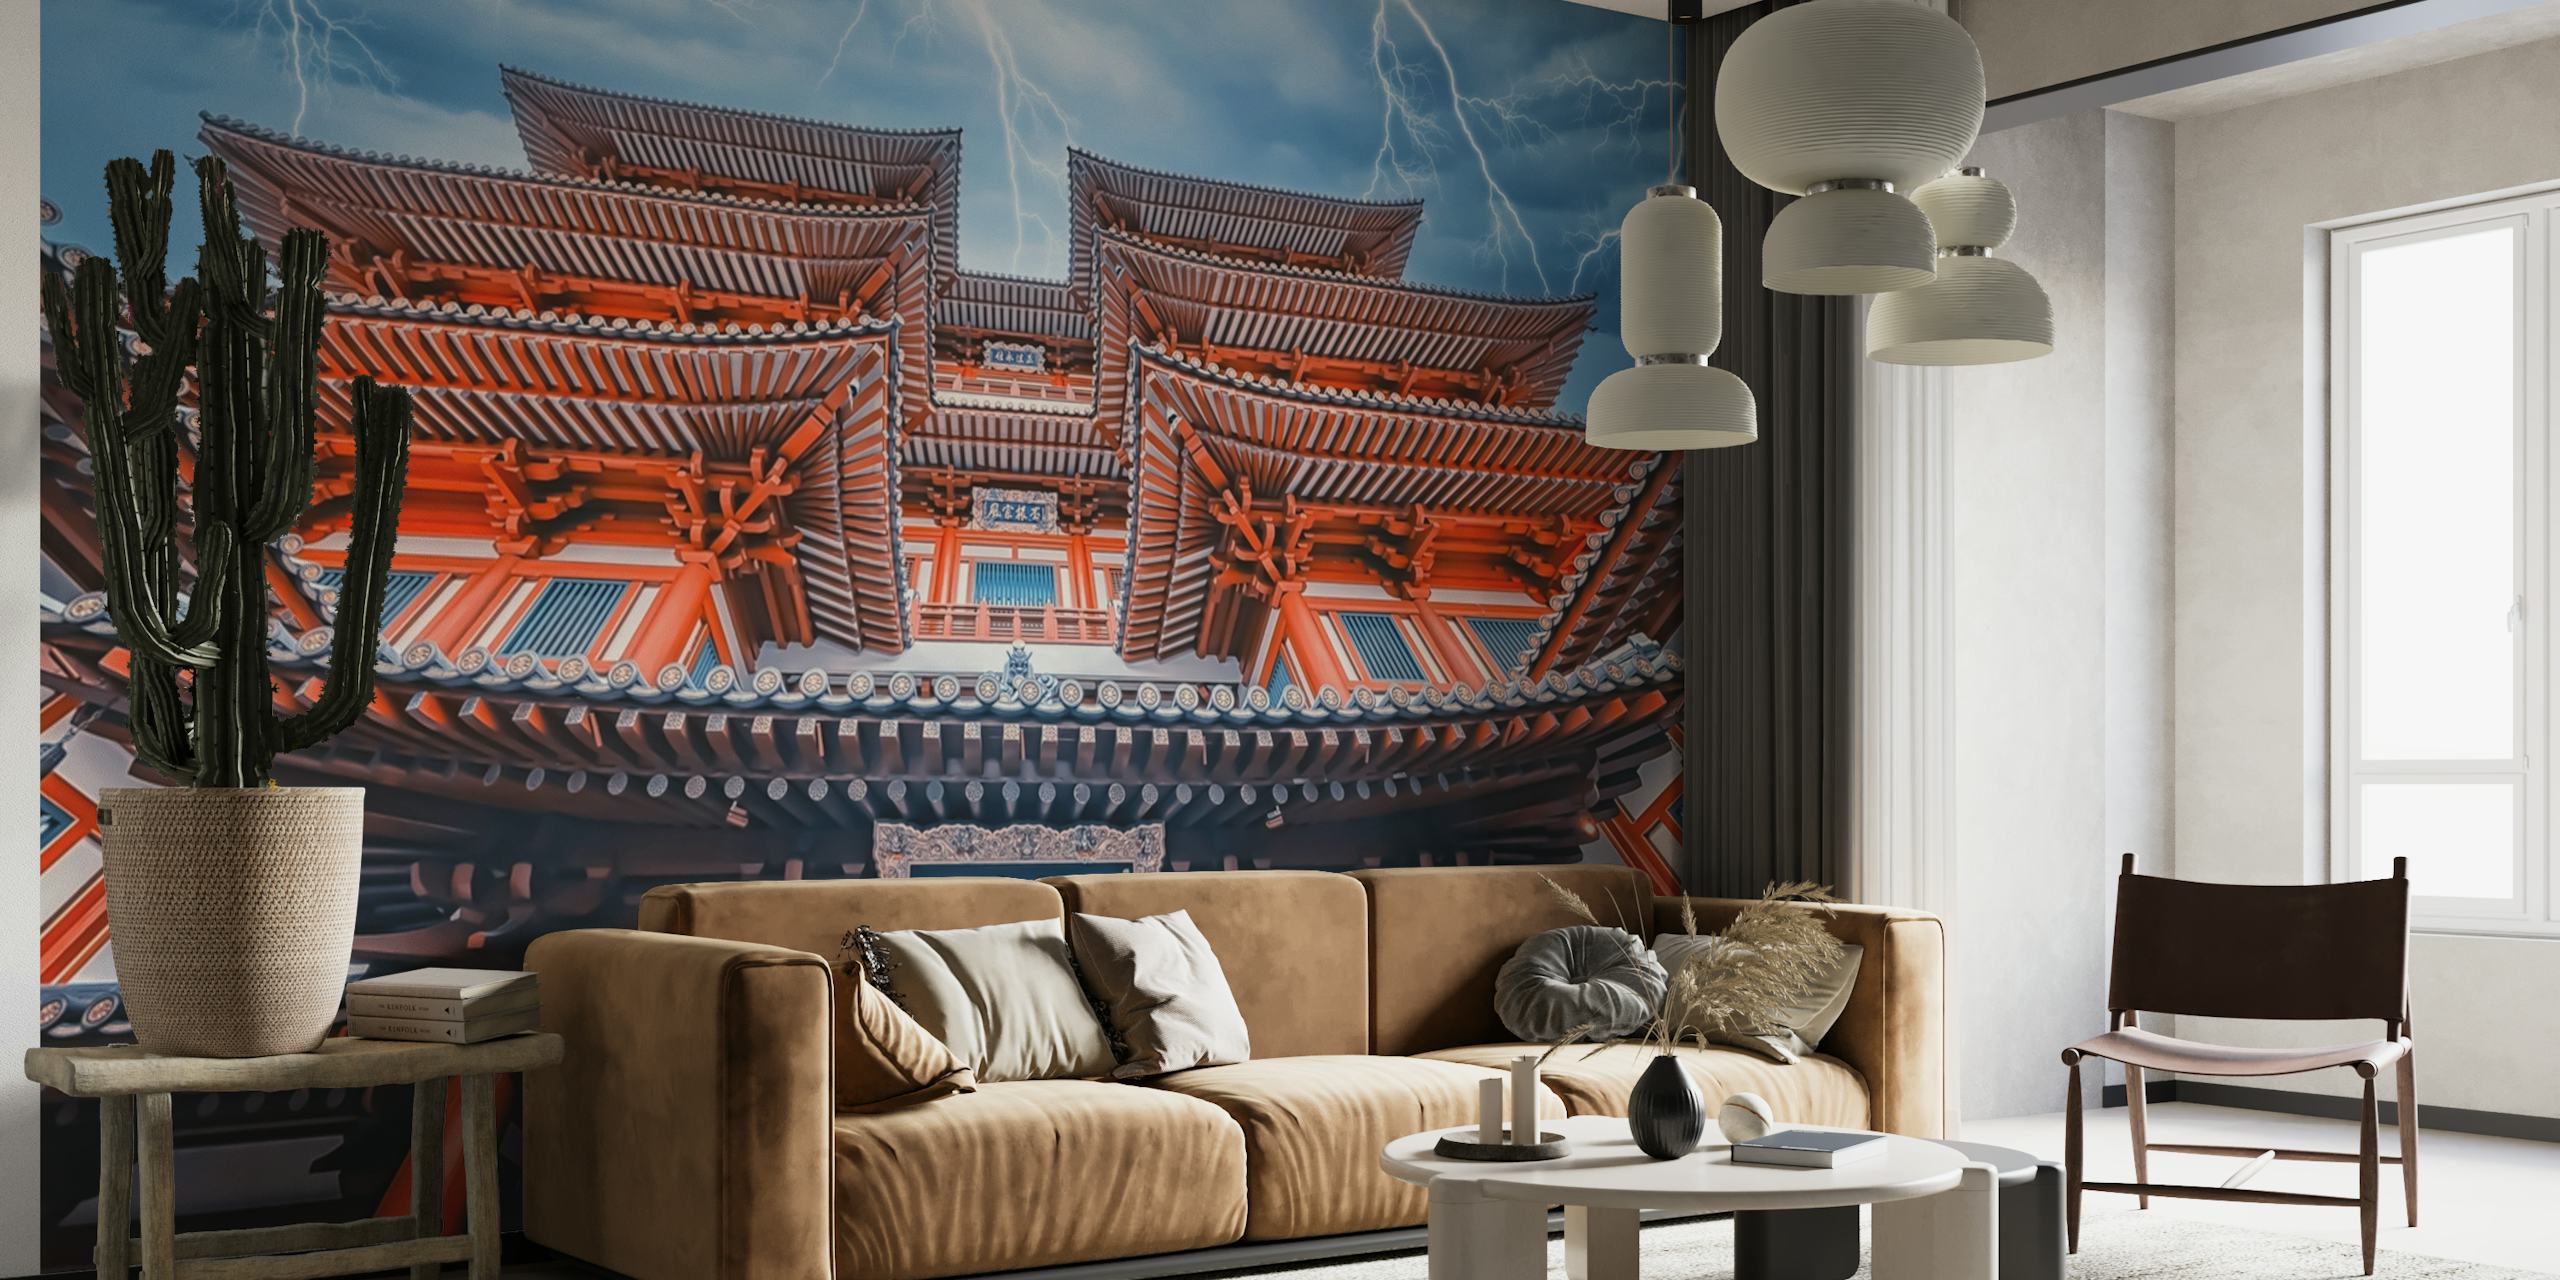 Electric thunderstorm over traditional temple wall mural